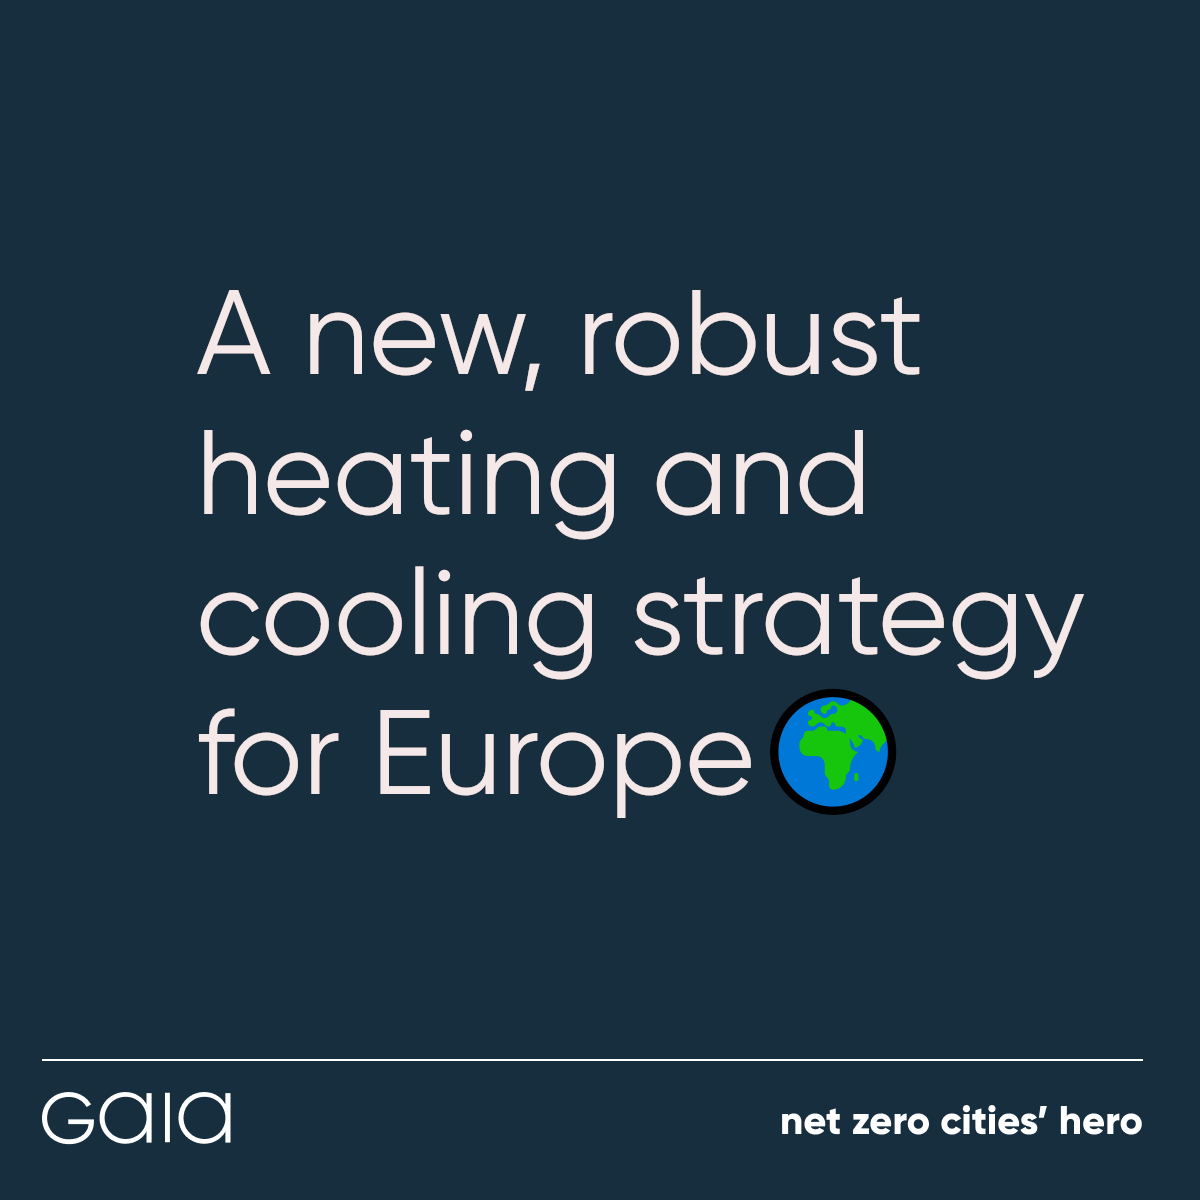 A new, robust heating and cooling strategy for Europe